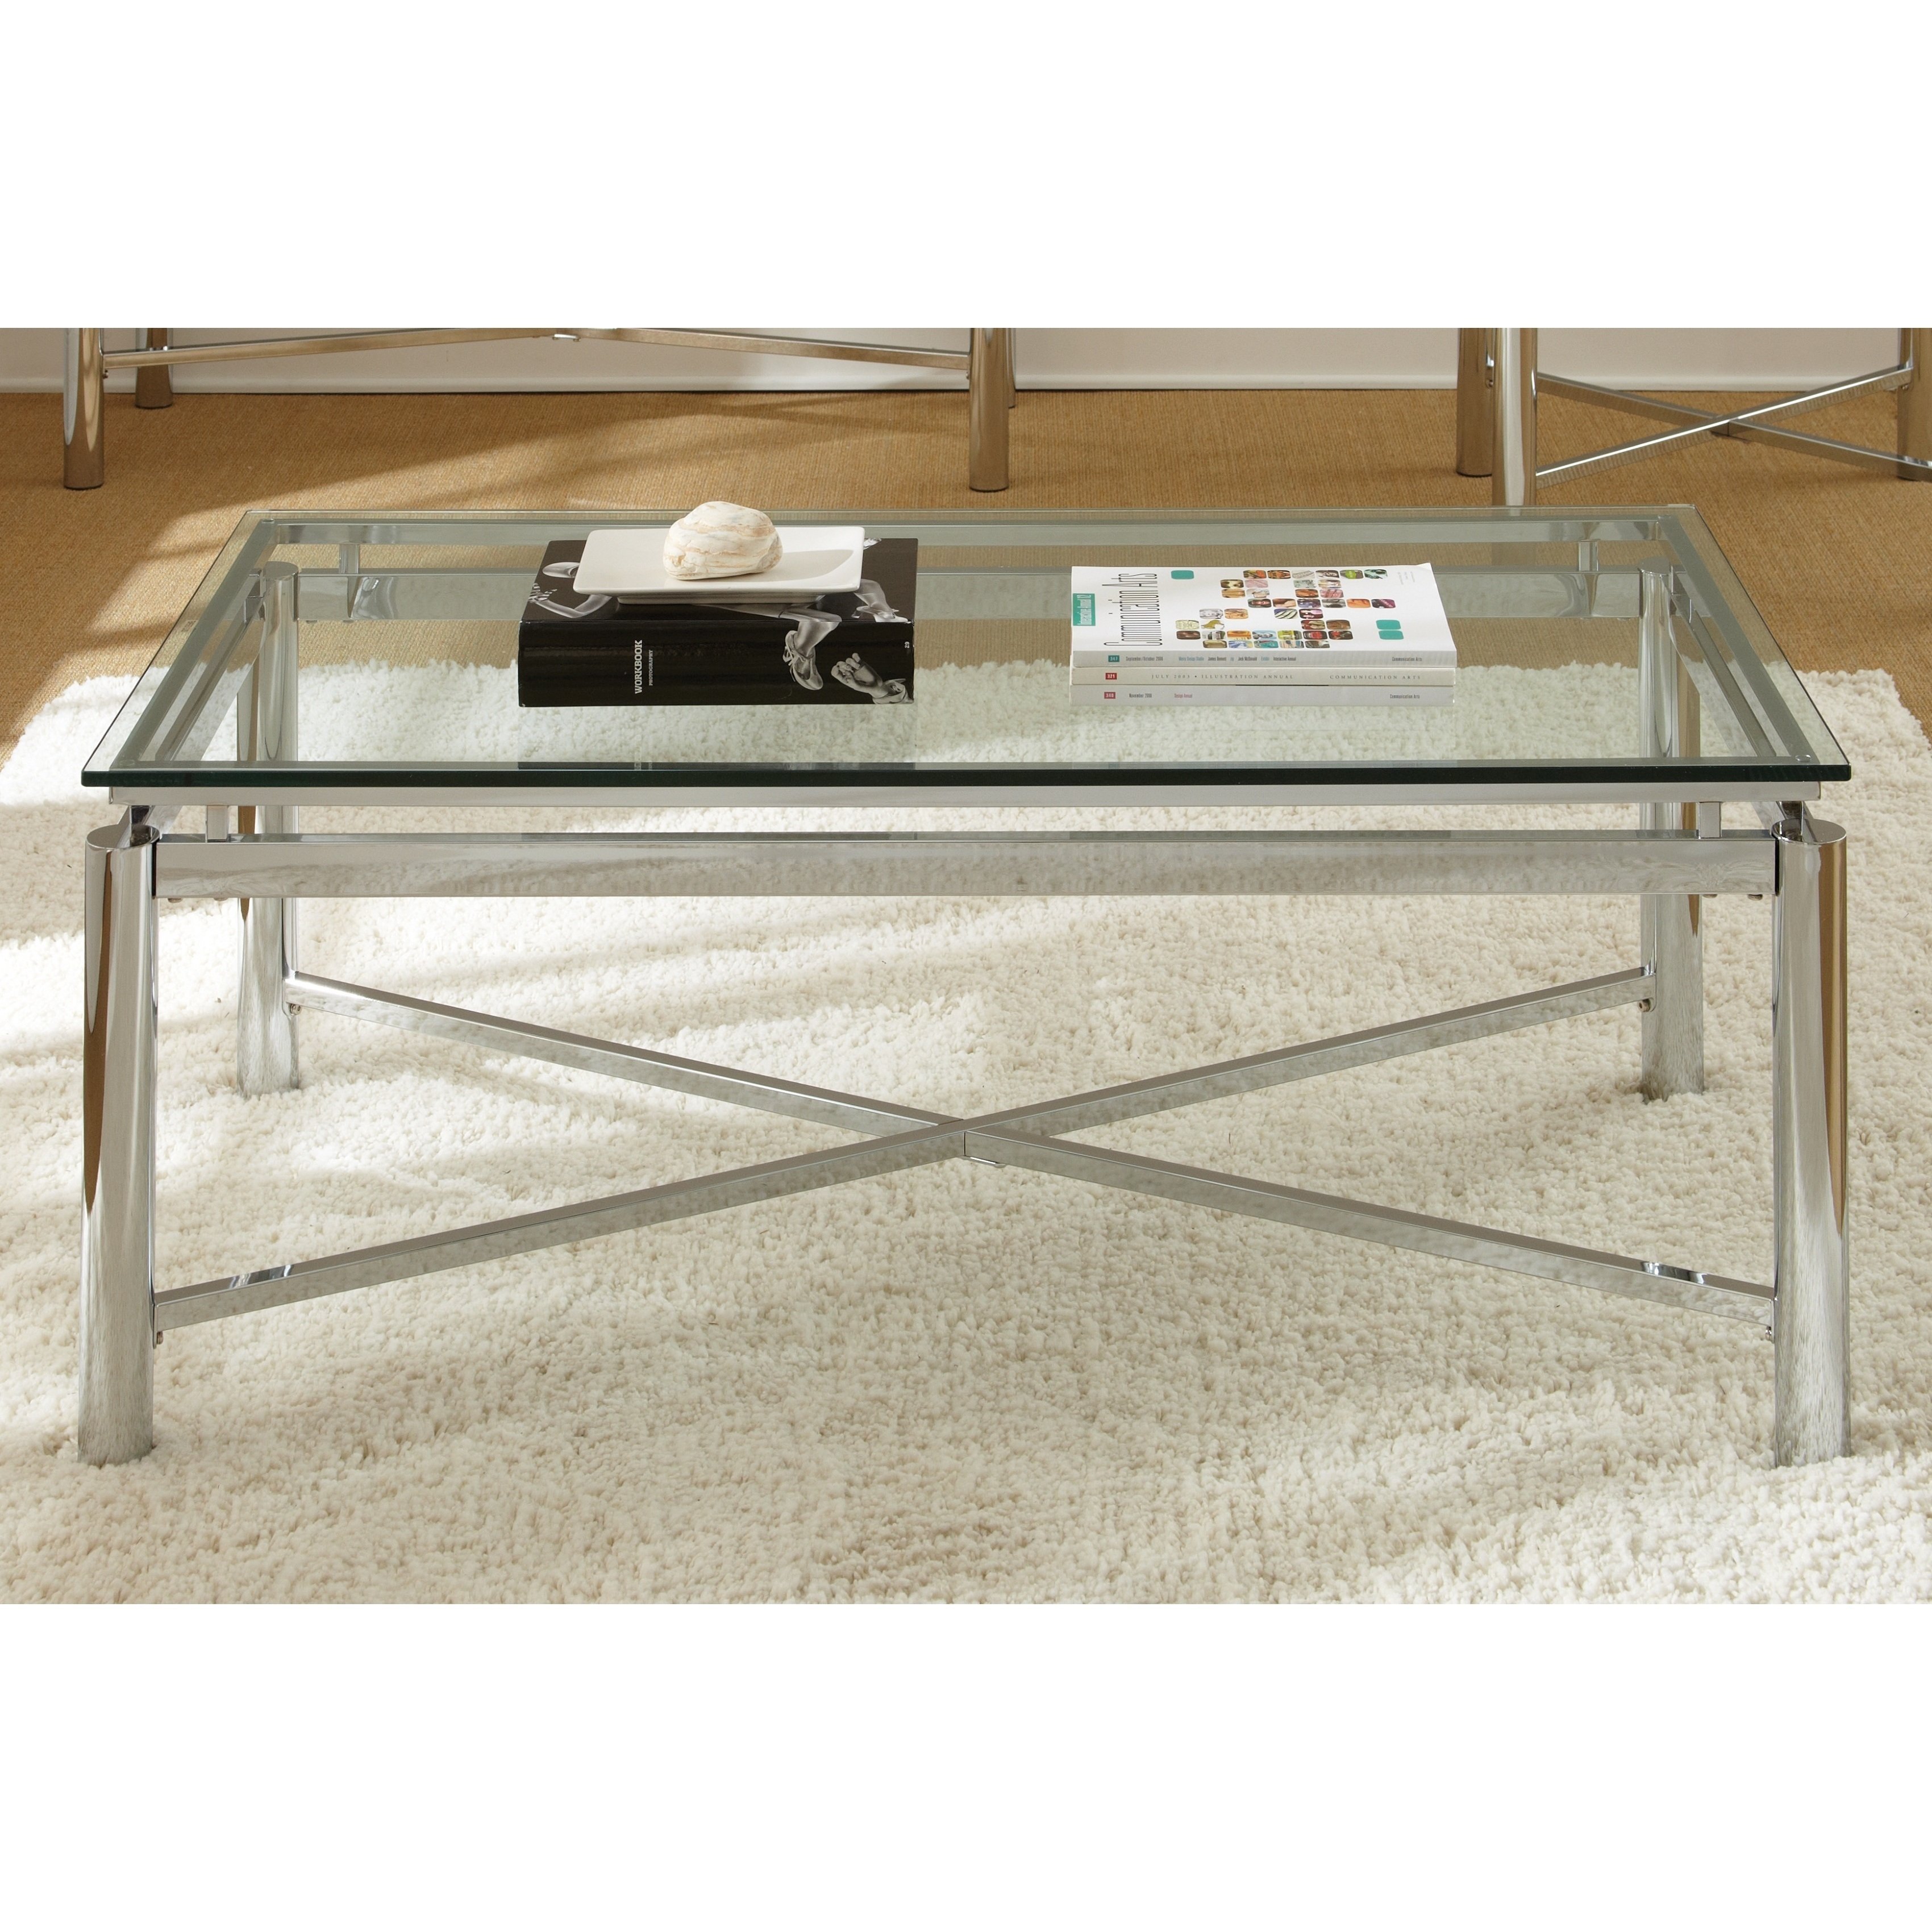 strick bolton jules chrome and glass coffee table free oliver james small accent unfinished wood low outdoor round lucite side target industrial furniture art deco desk marble